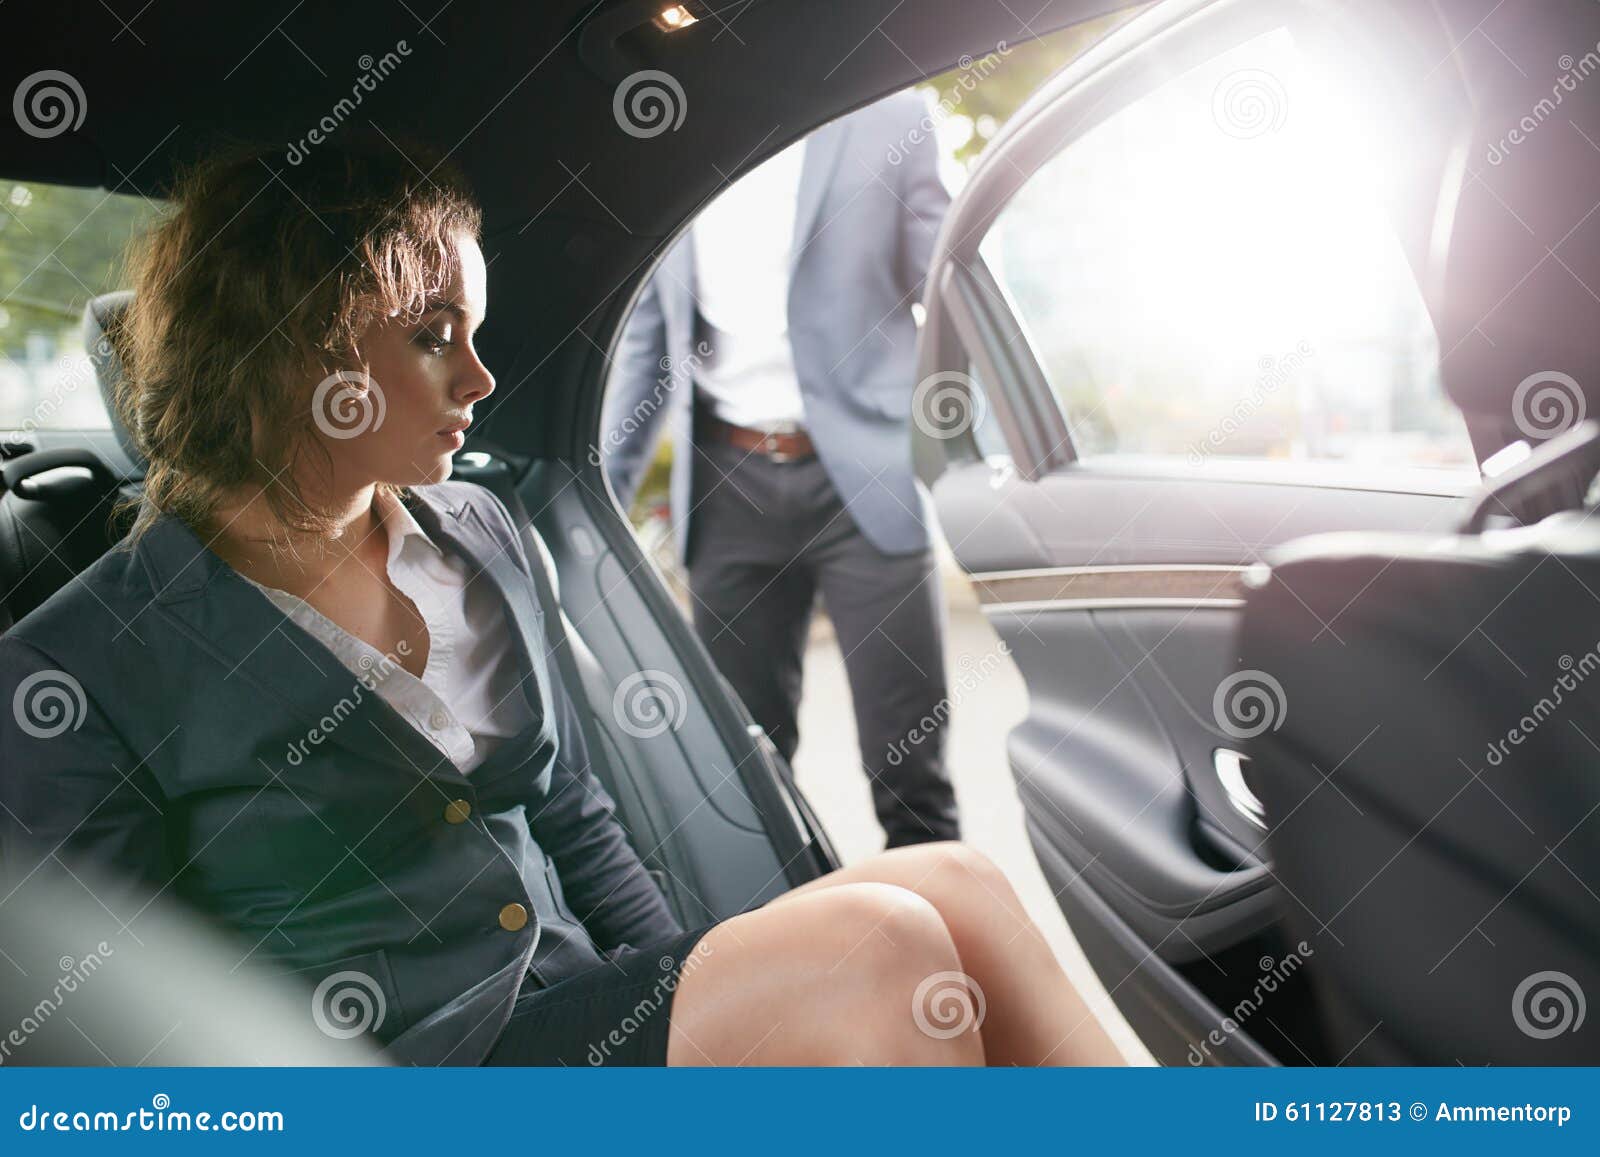 Businesswoman Getting Out Of A Car Stock Image Image Of Lifestyle Passenger 61127813 